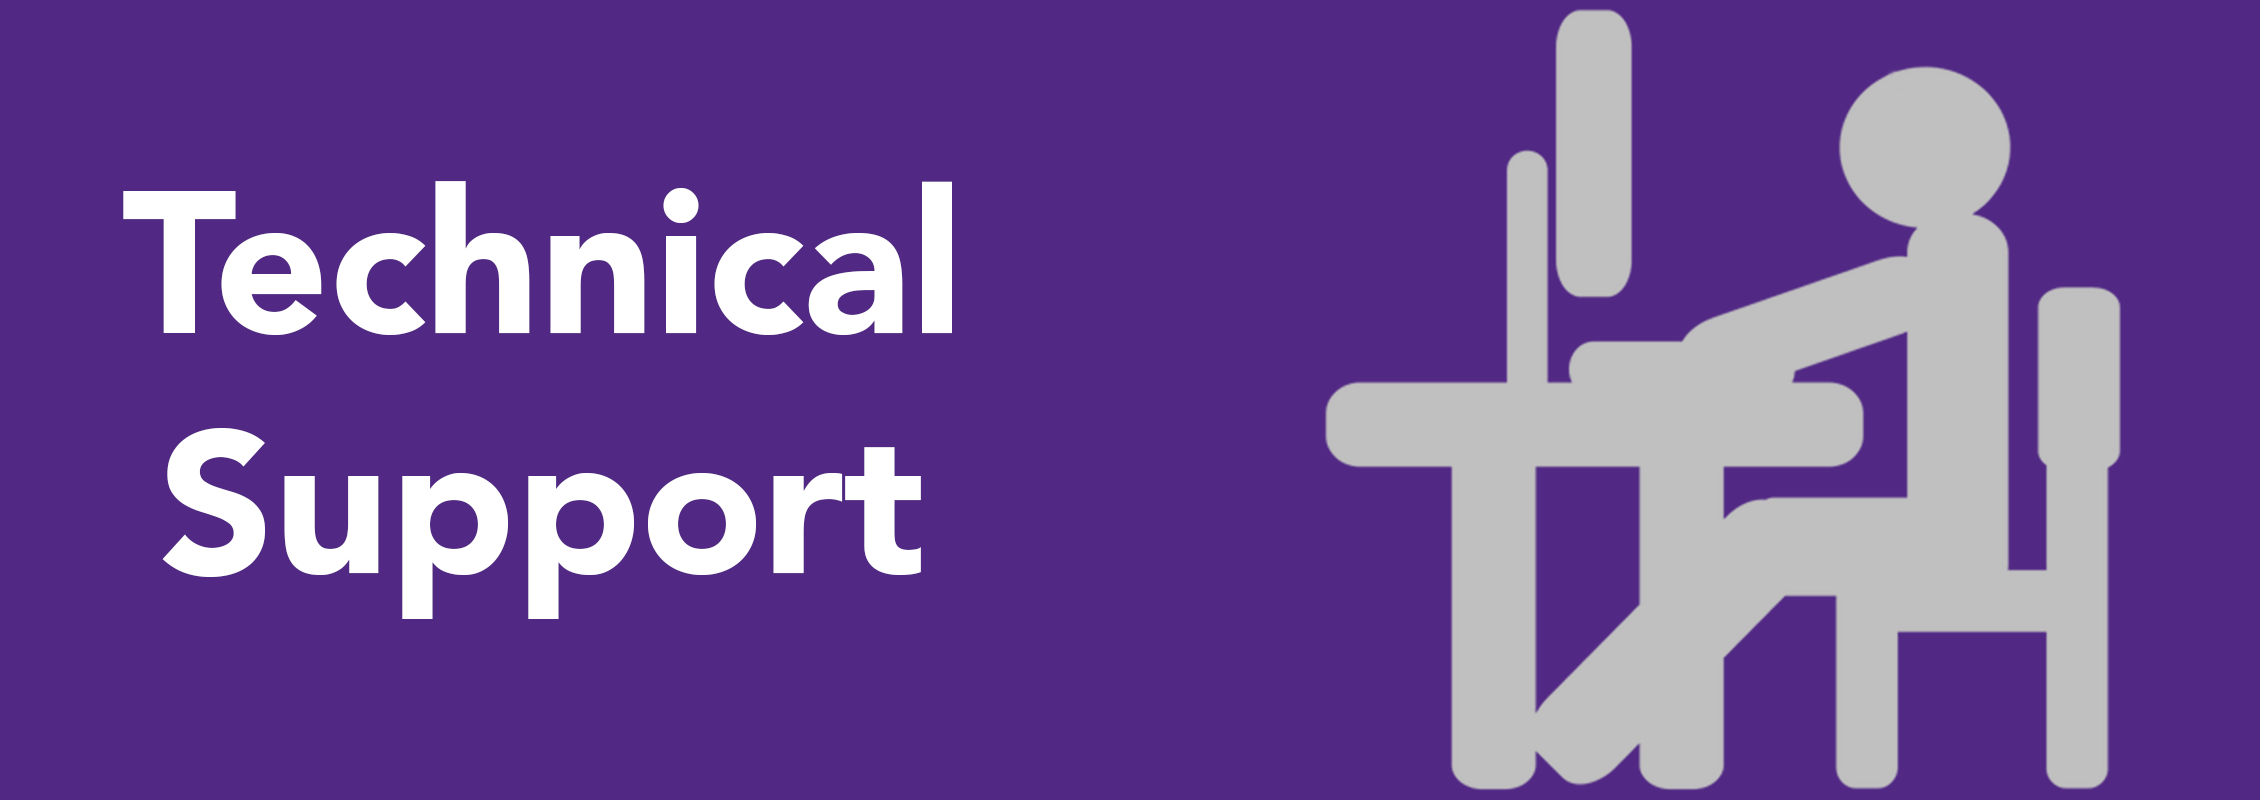 Icon depicting technical support